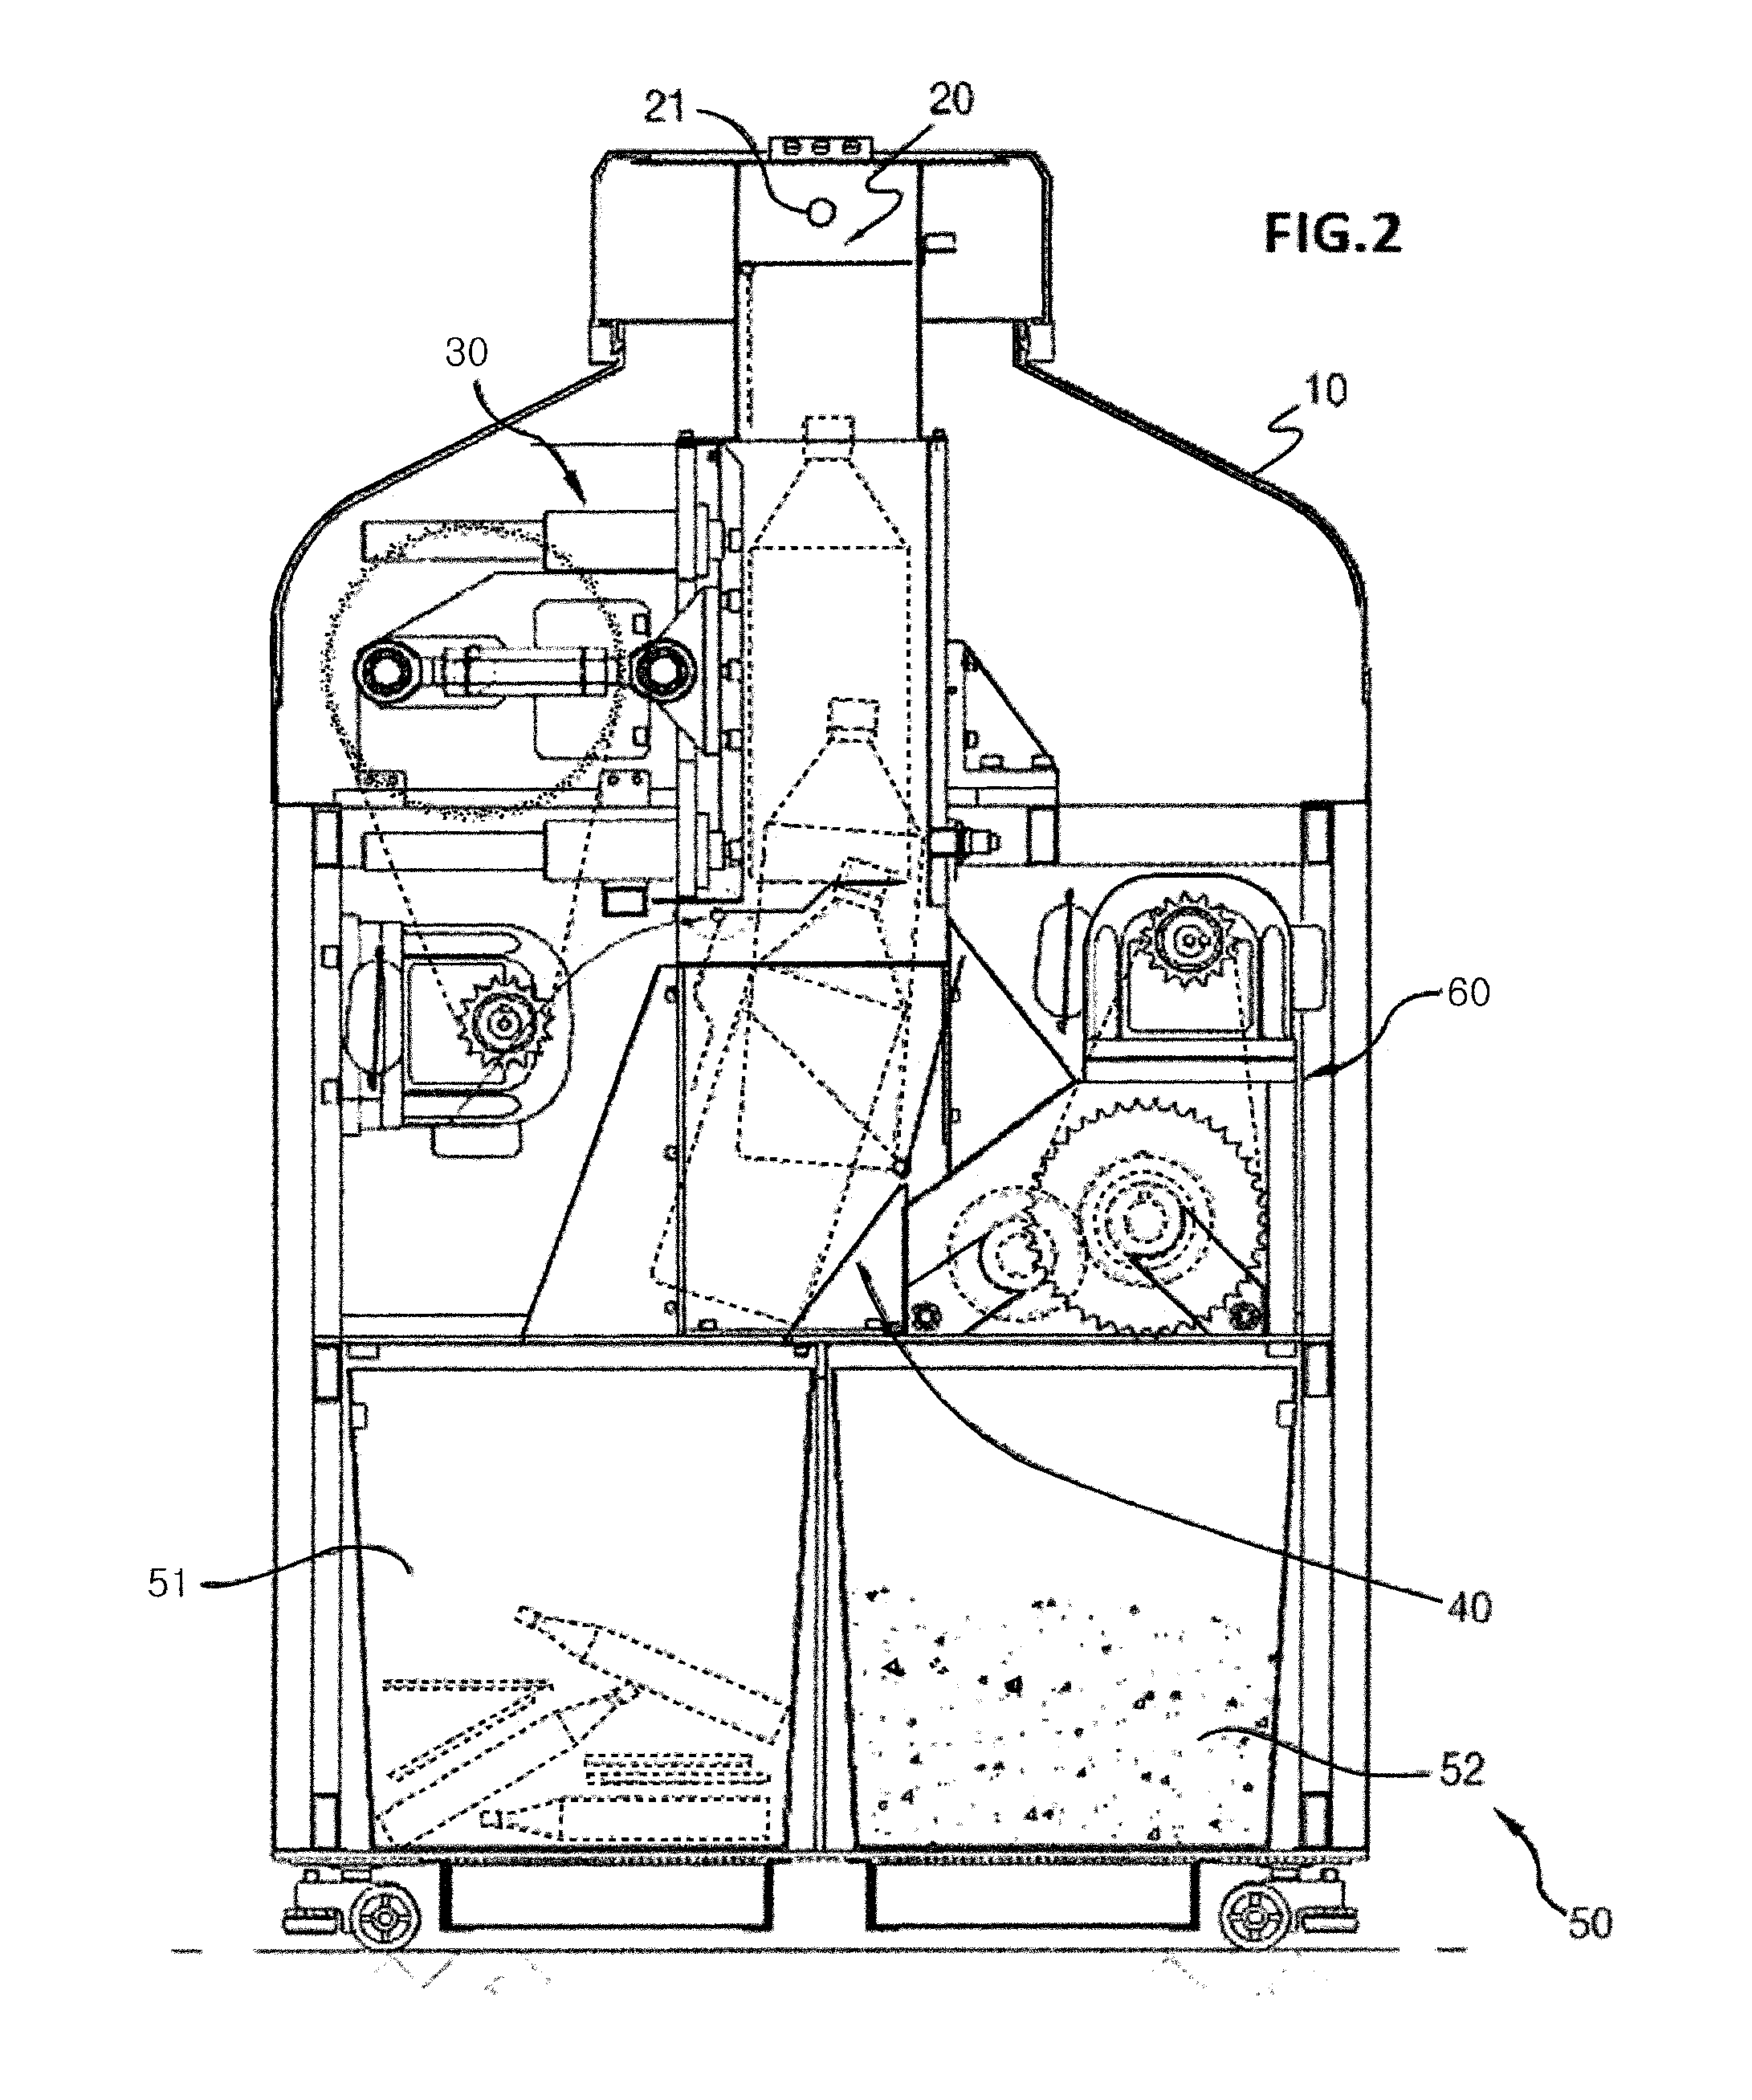 Selective collection system for recycling input materials